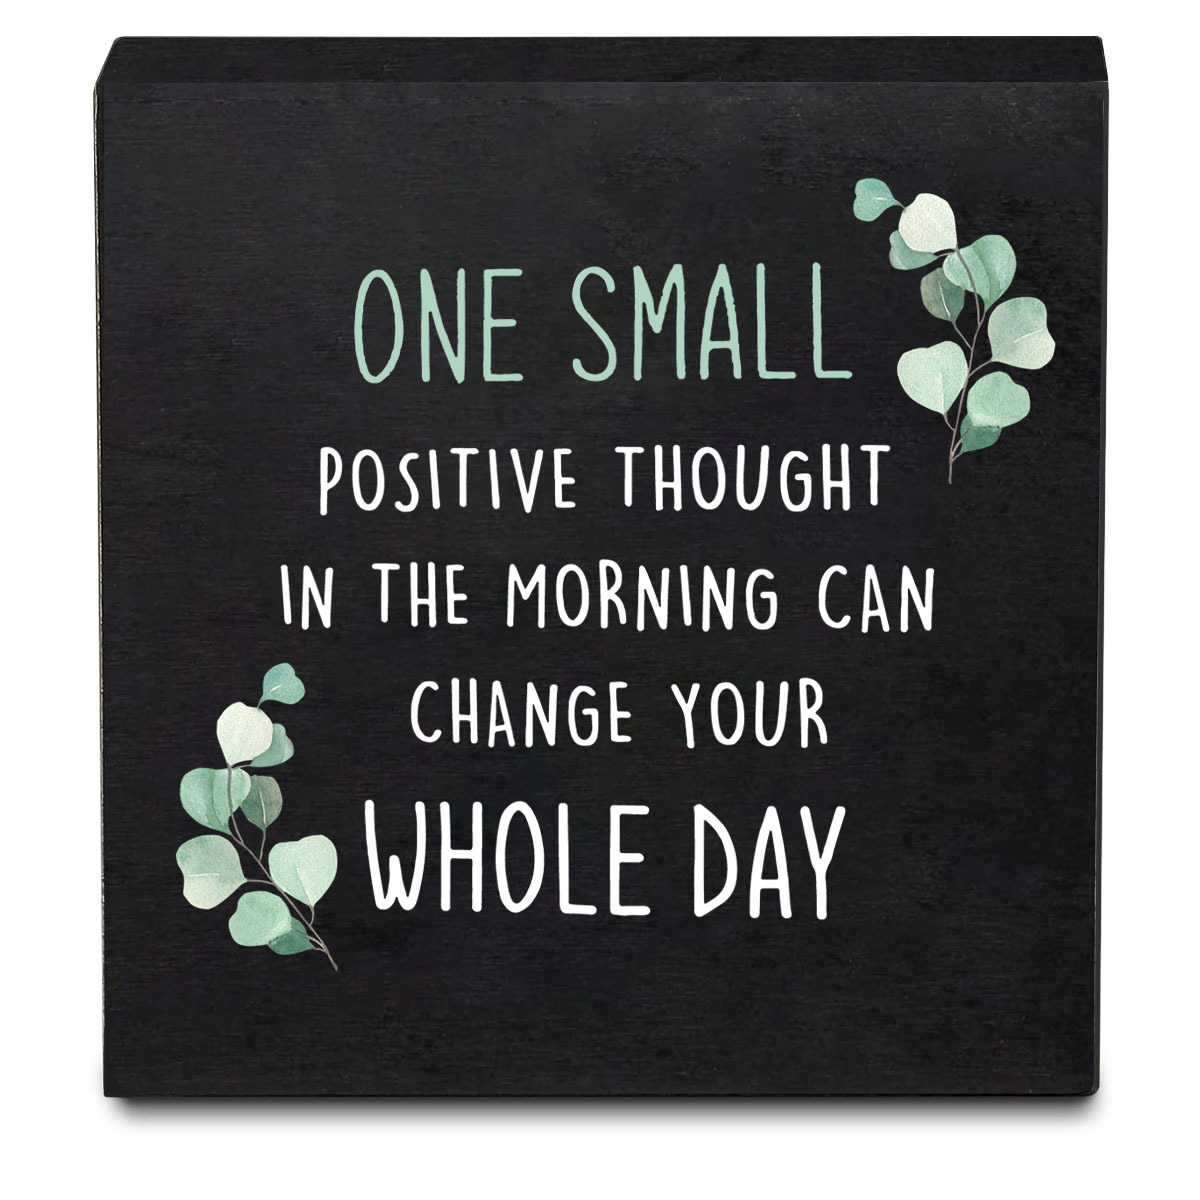 

1pc, Inspirational Wooden Plaque Sign, 1 Small Positive Thought, Farmhouse Retro White Box Wall Sign Decorations, Office Desk Bathroom Shelf Art Decor For Home